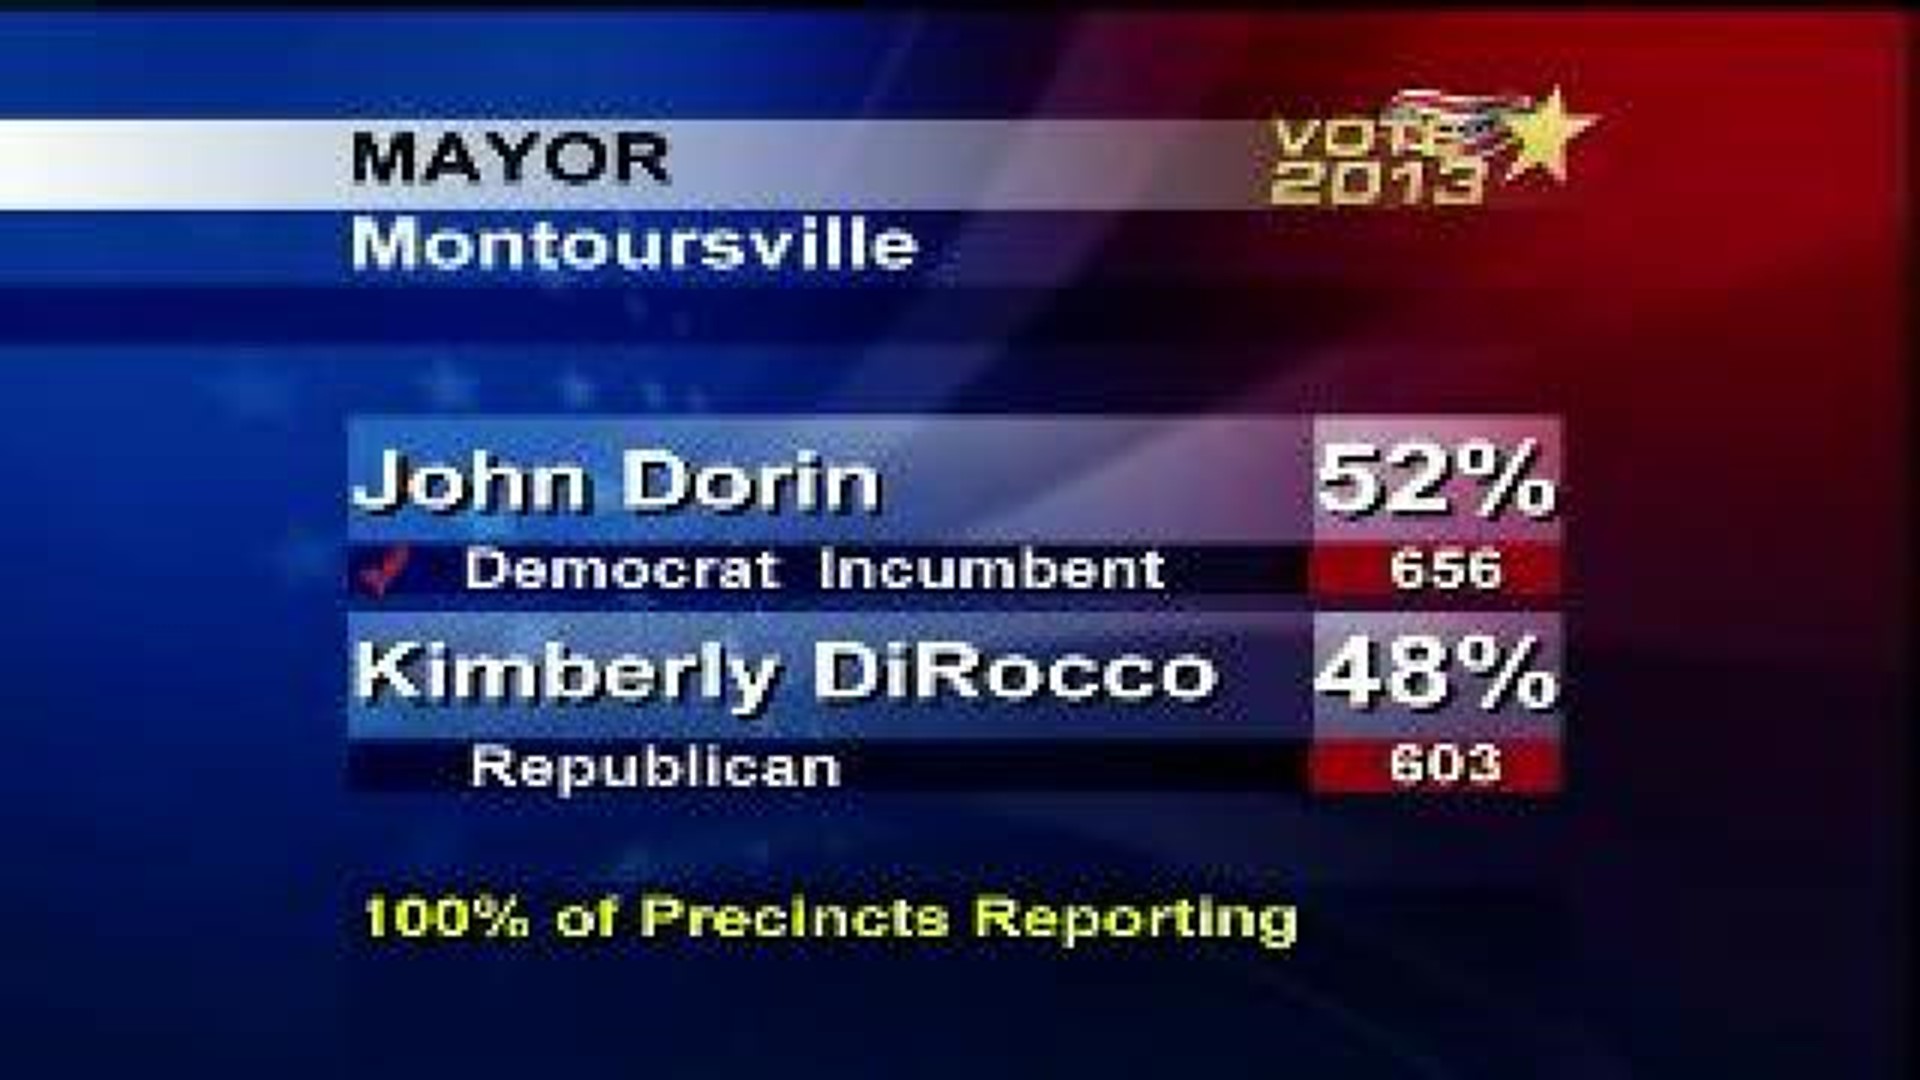 Four More Years For Montoursville Mayor